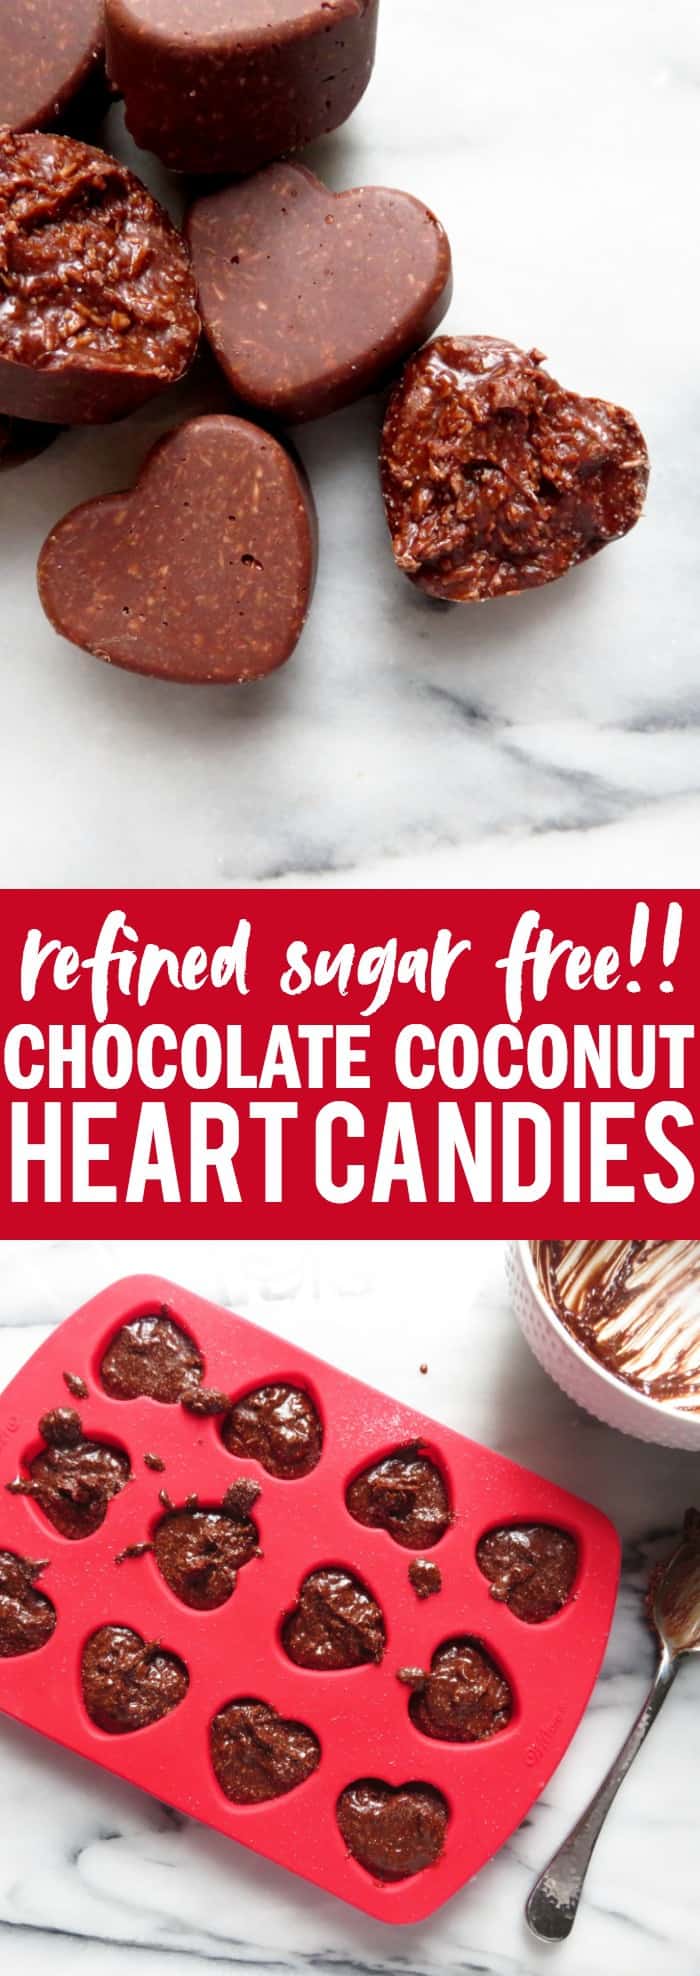 Deliciously sweet and crunchy Chocolate Coconut Heart Candies that make a perfect dessert to end the night or gift for a special someone!! thetoastedpinenut.com #sugarfree #valentinesday #homemade #candies #chocolate